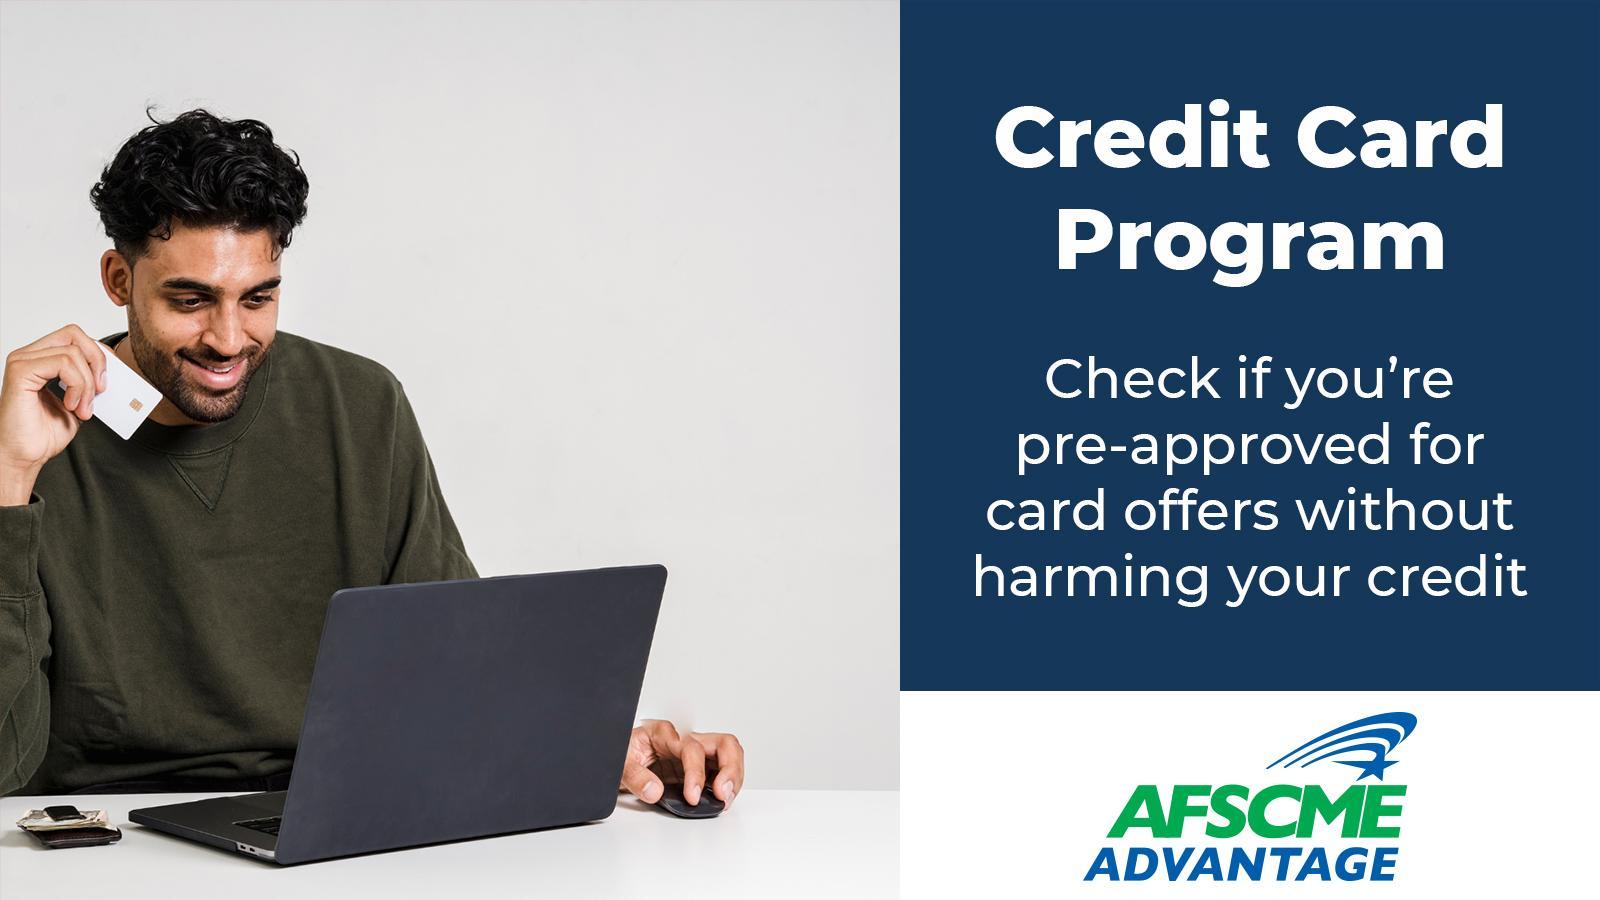 Credit Card Program: Check if you're pre-approved for card offers without harming your credit